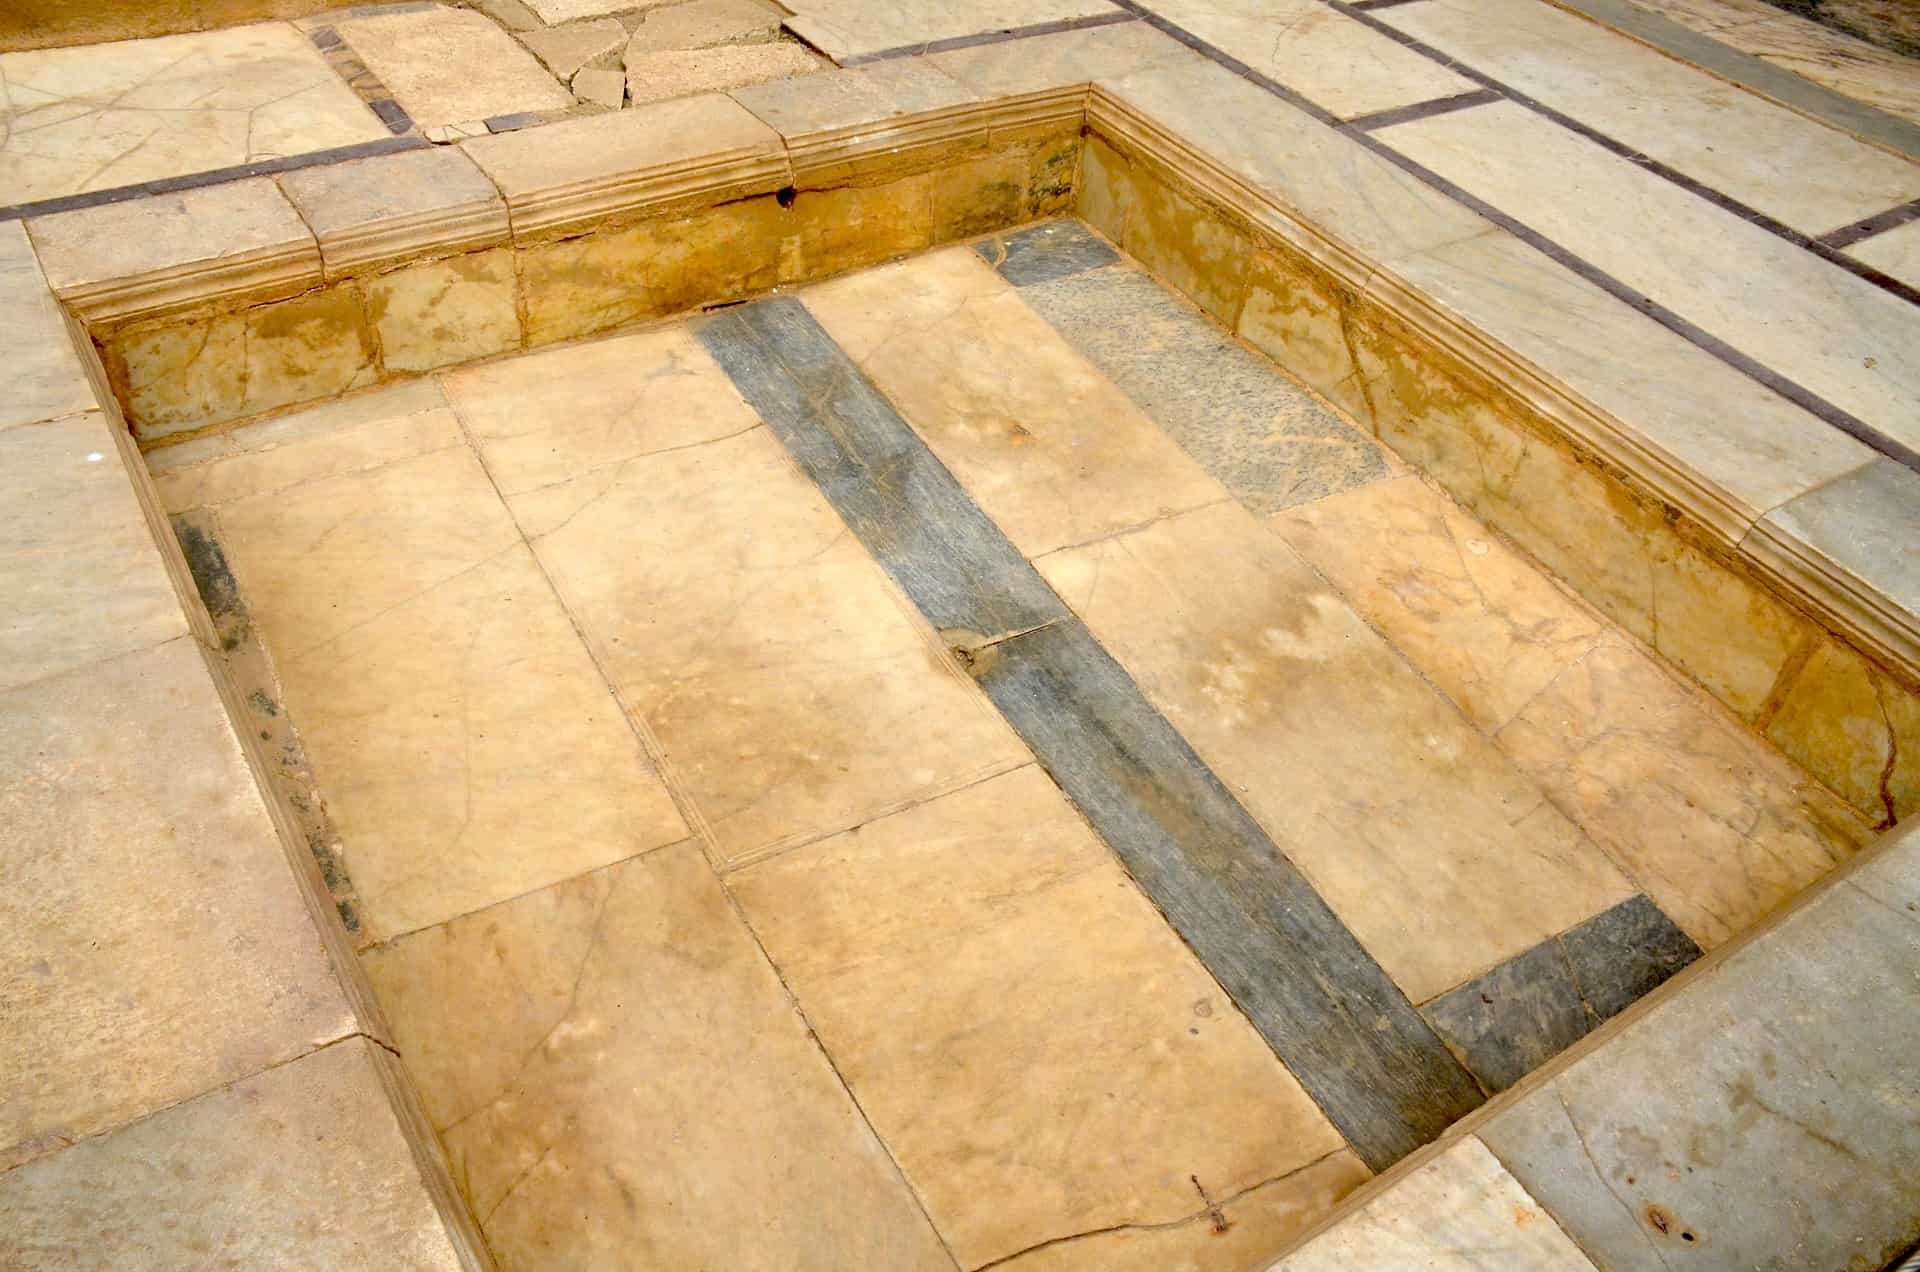 Water basin in Room 36 of Dwelling Unit 6 in the Terrace Houses at Ephesus